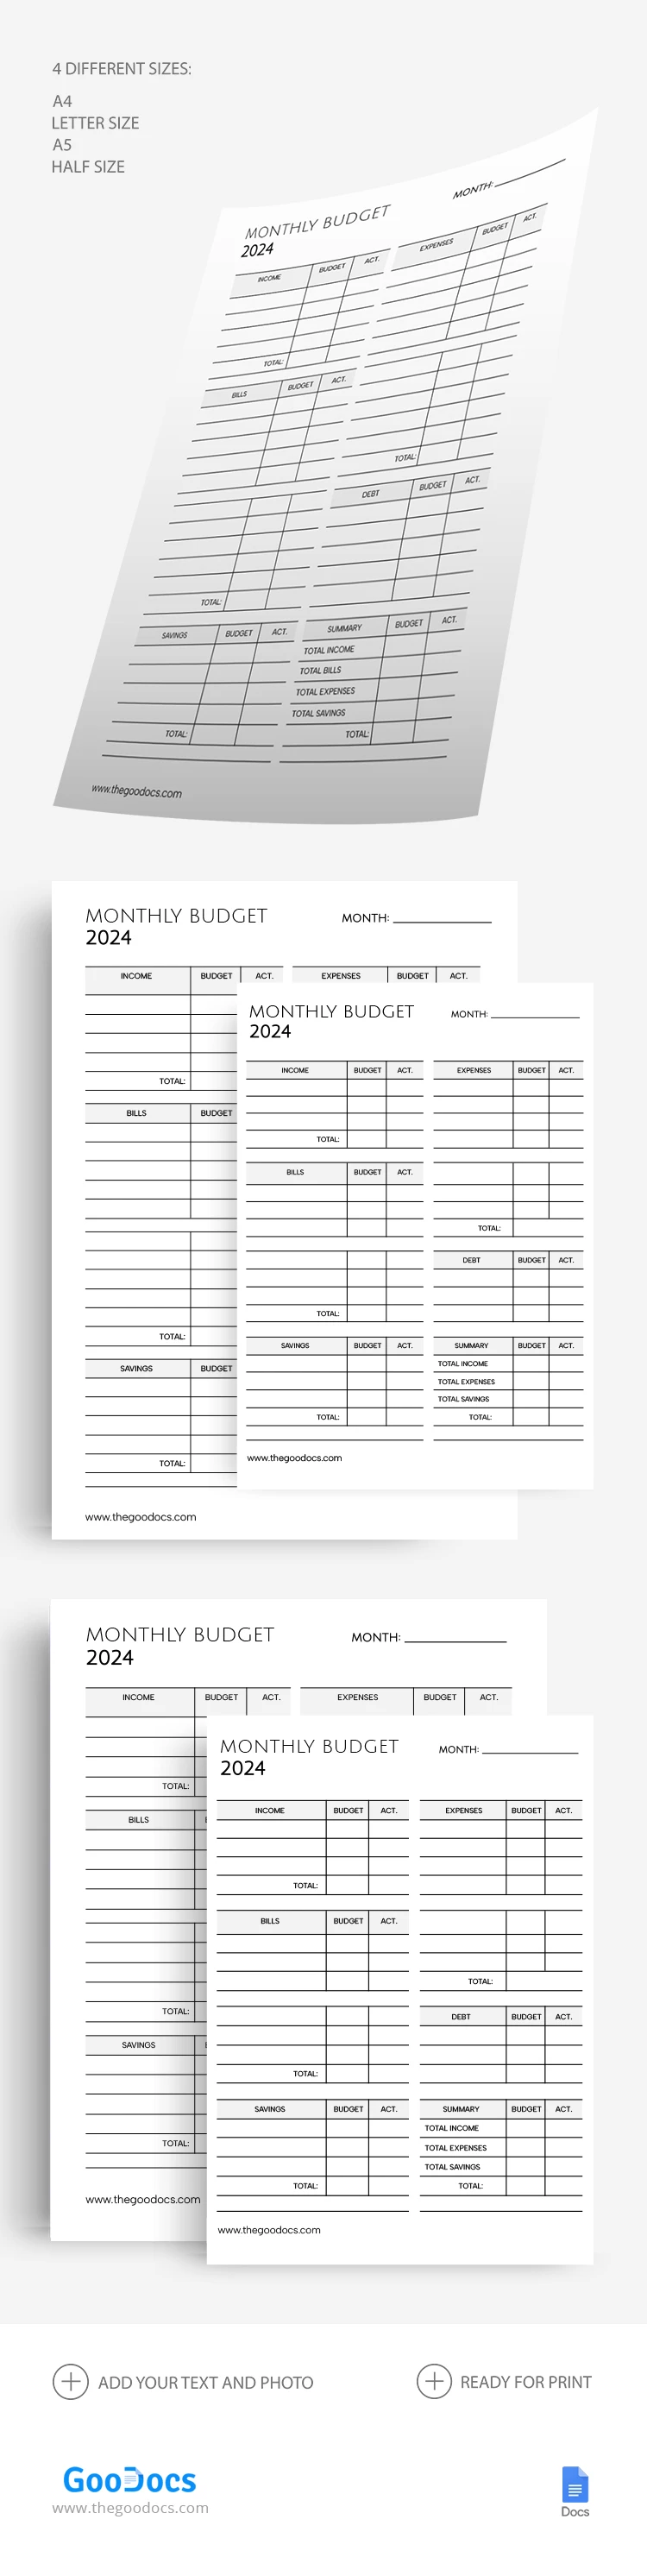 Minimalistic Monthly Budget - free Google Docs Template - 10068533